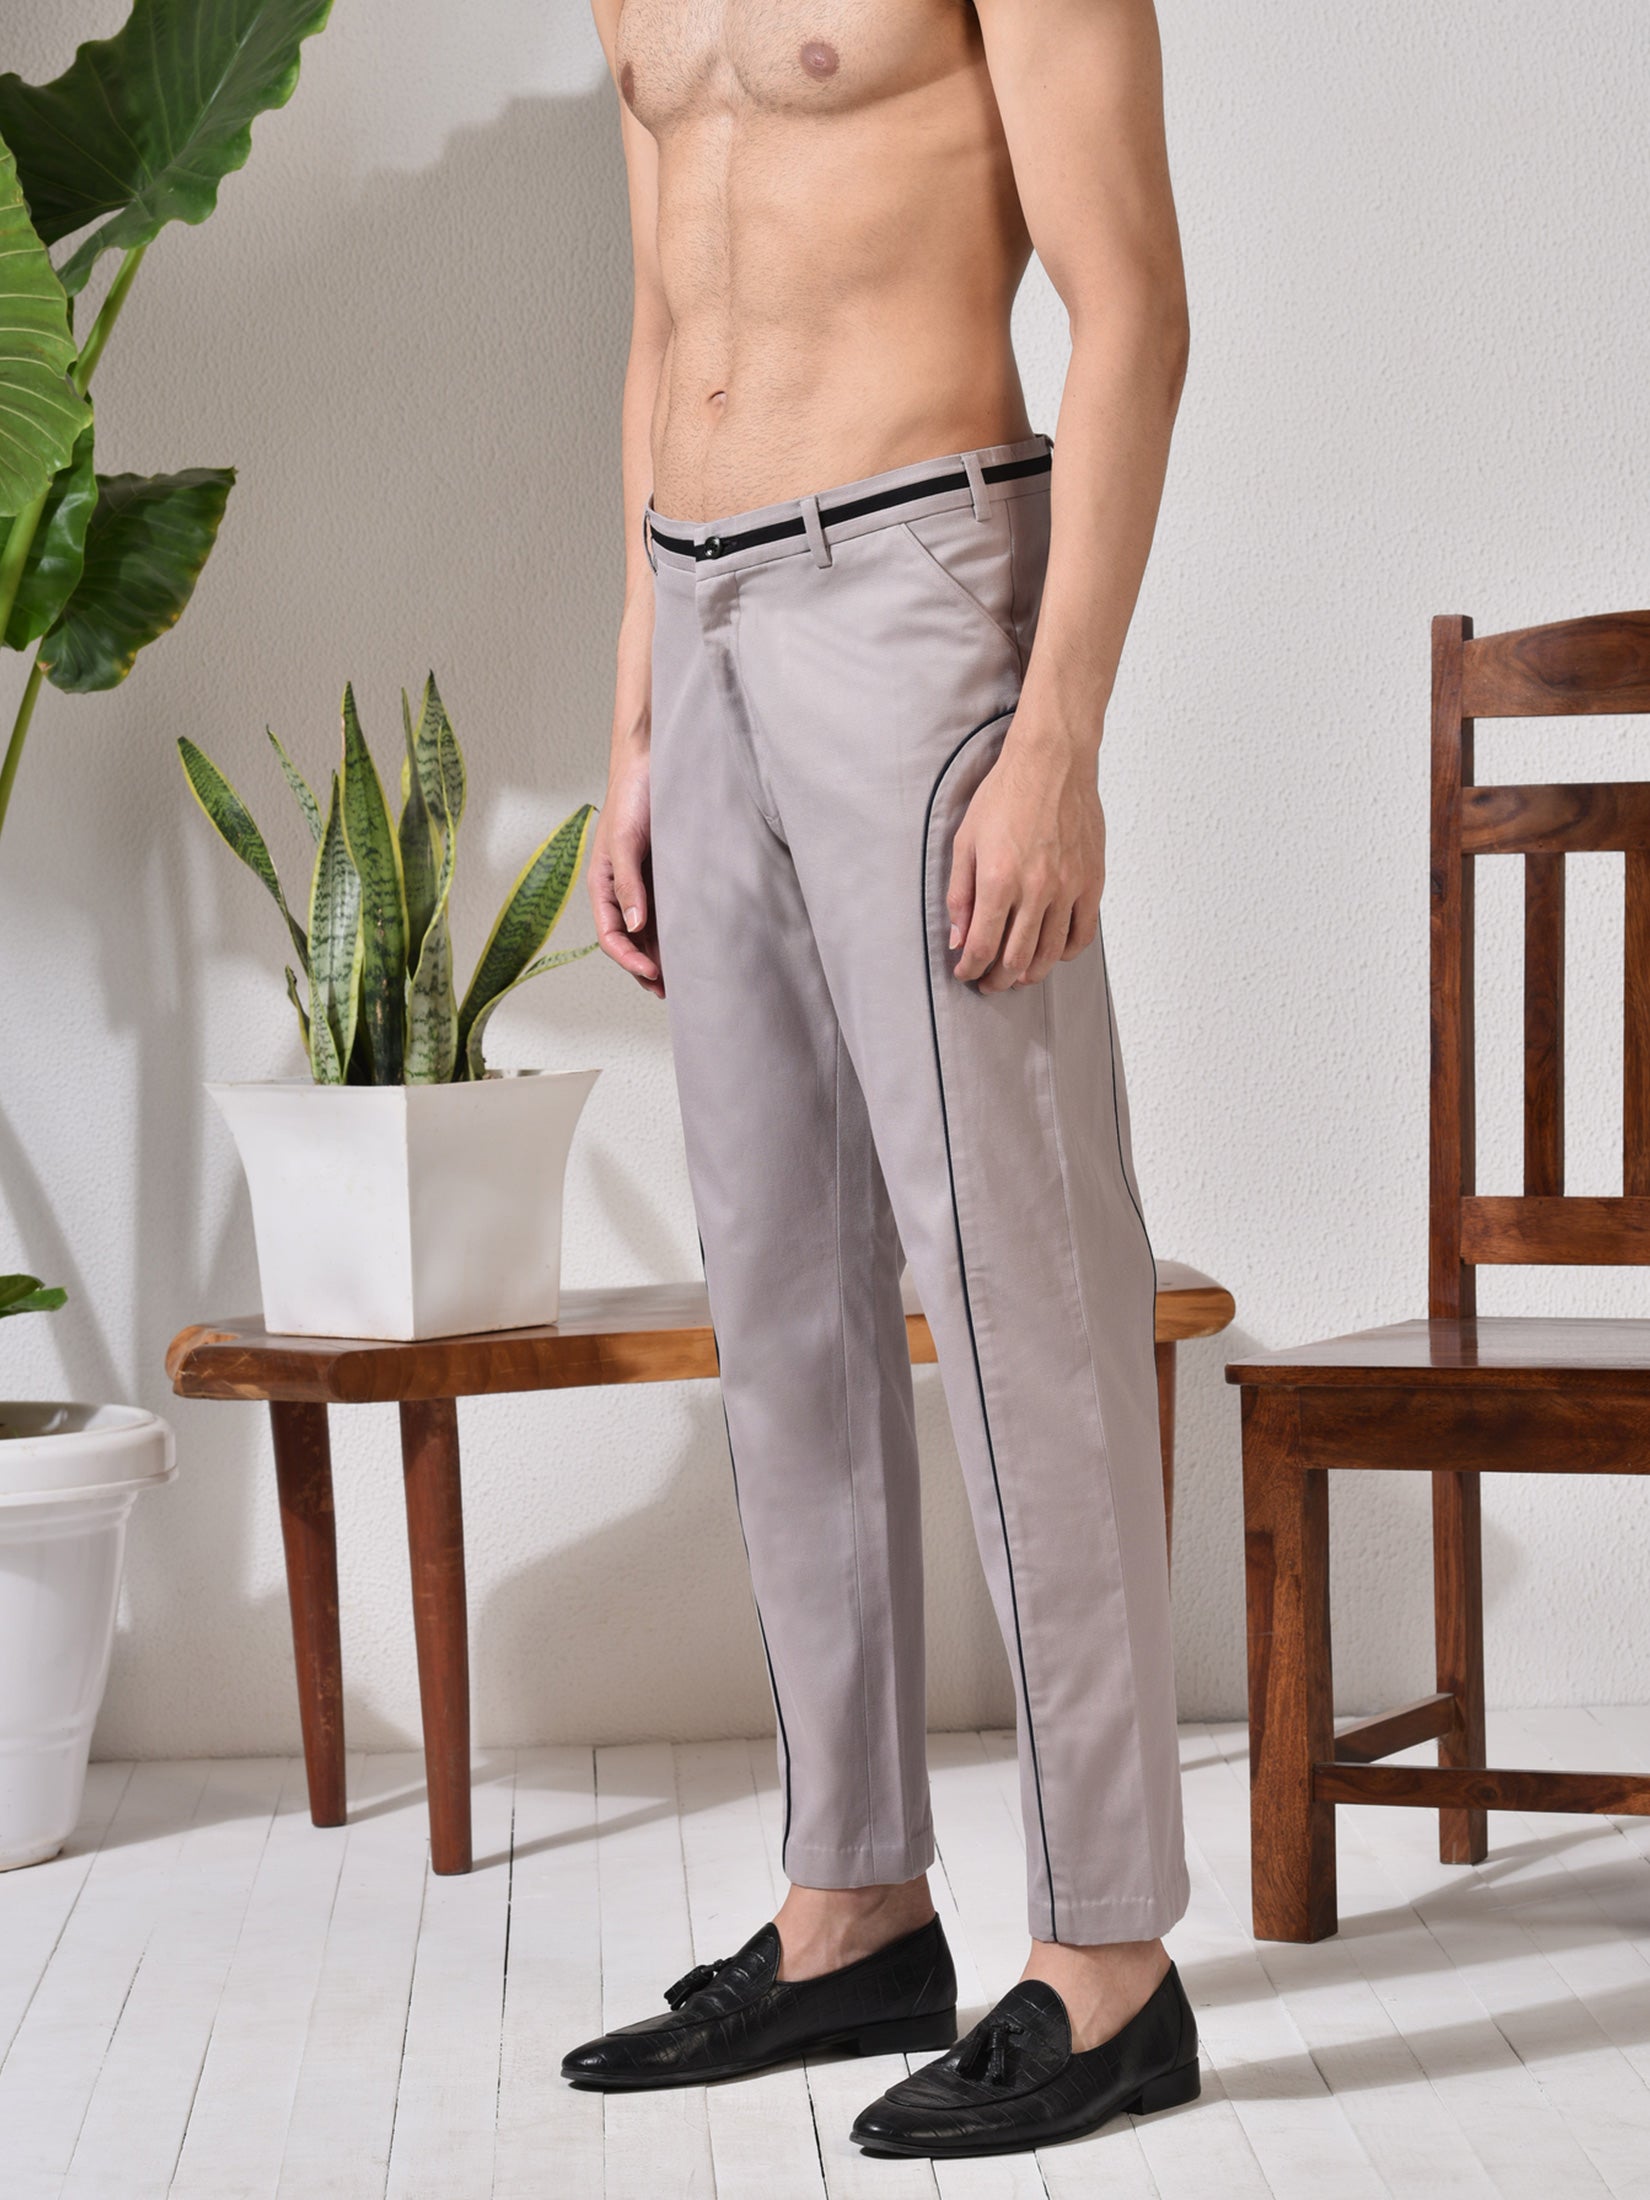 Insignia, Pastel Beige Trouser With Black Highlights